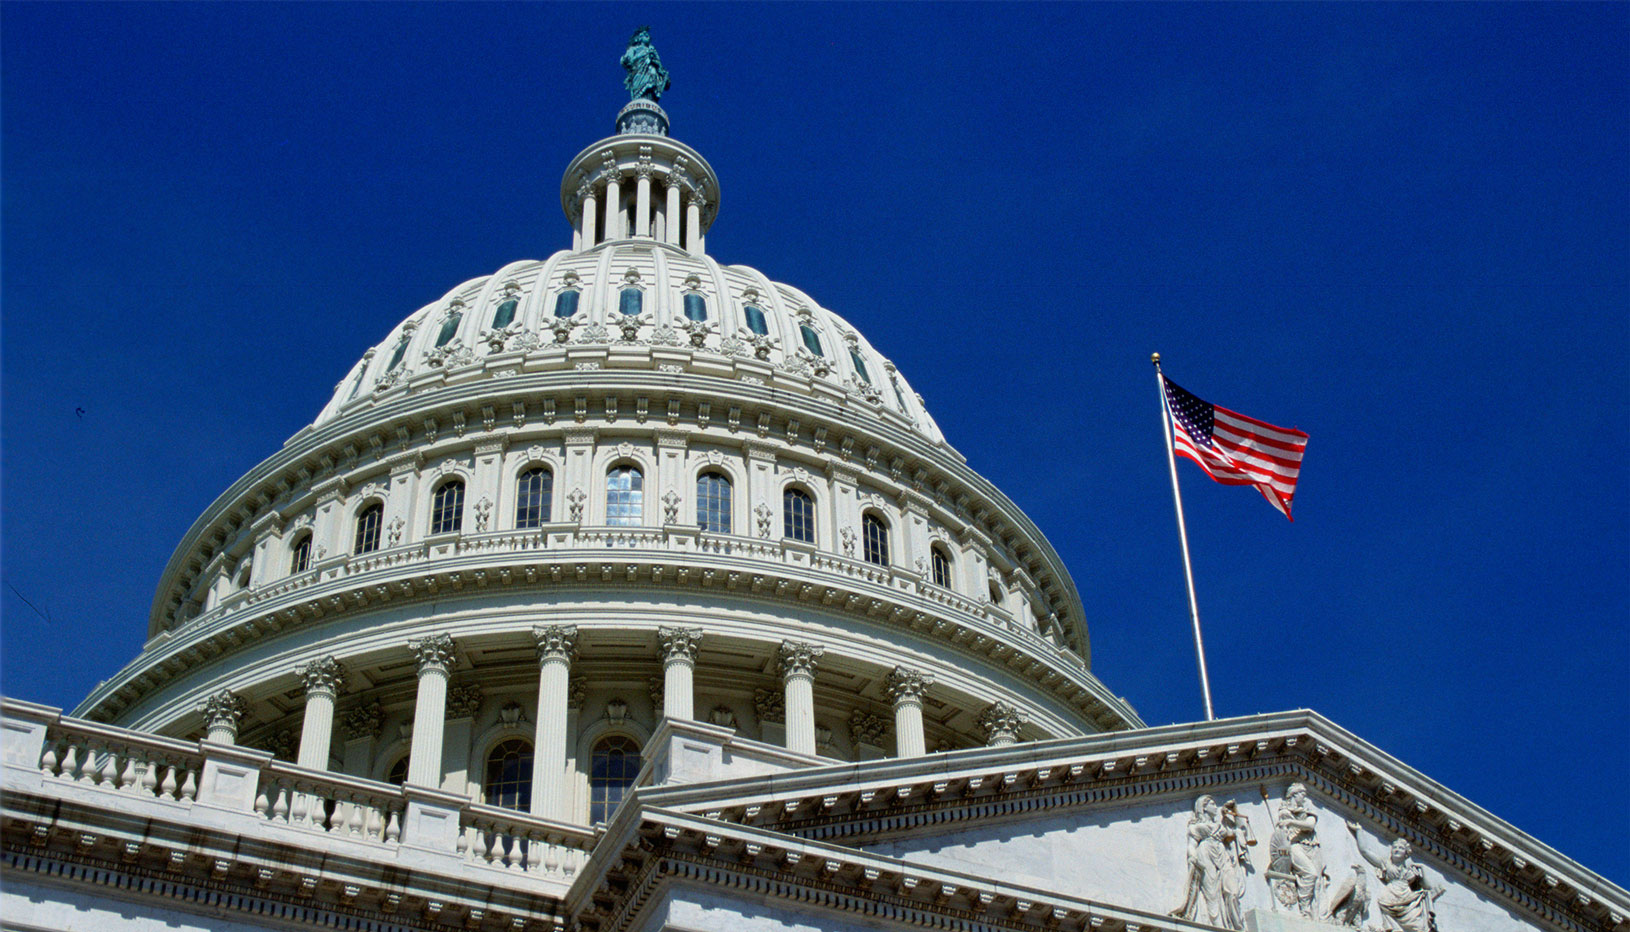 image of the outside of the U.S. Capitol dome, looking up from the ground